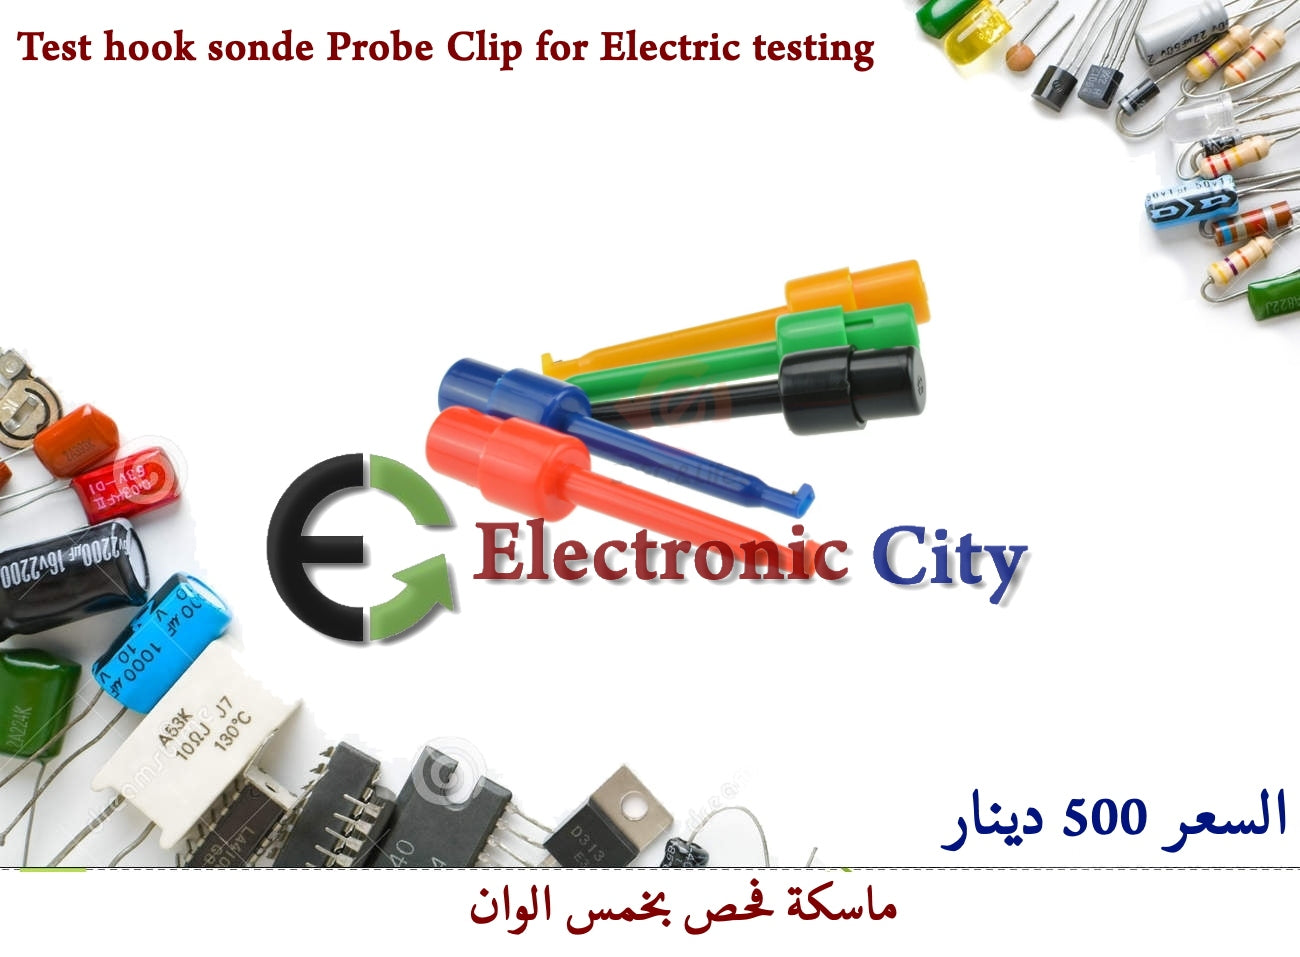 Test hook sonde Probe Clip for Electric testing